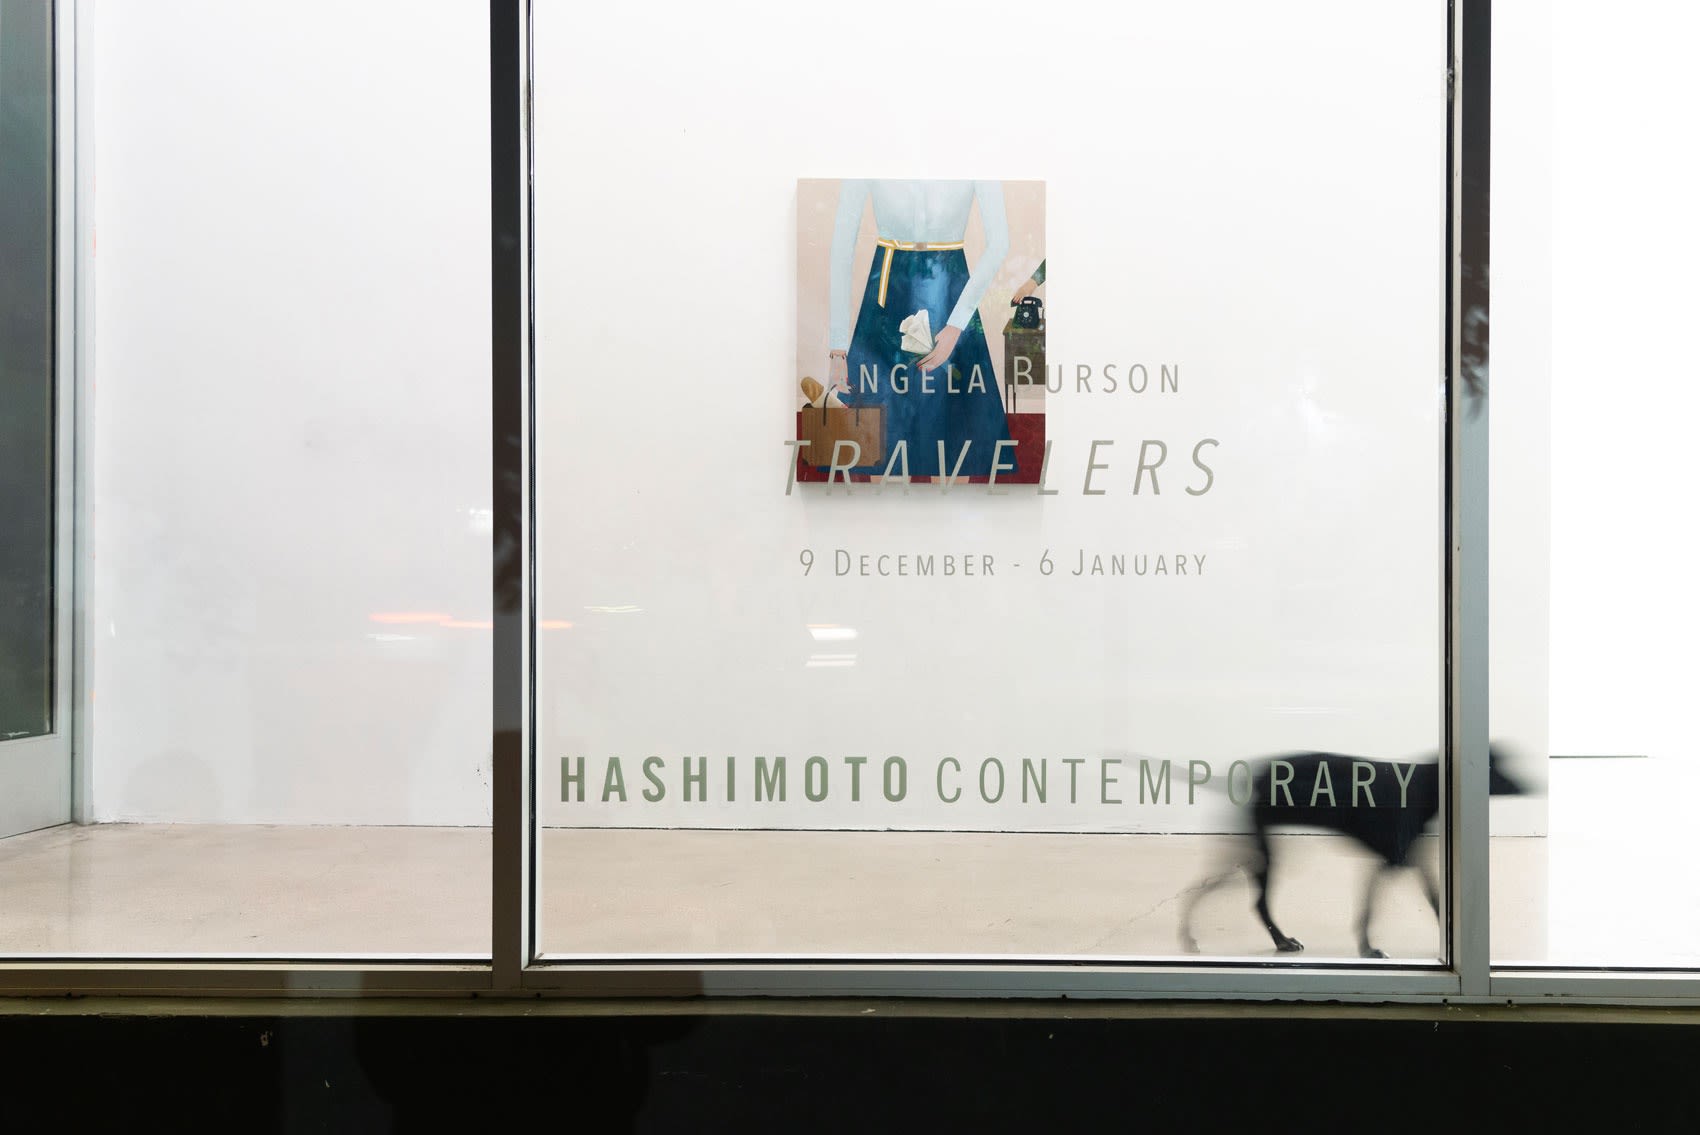 A photo from outside Hashimoto Contemporary at night time showing the title of Angela Burson's solo exhibition 